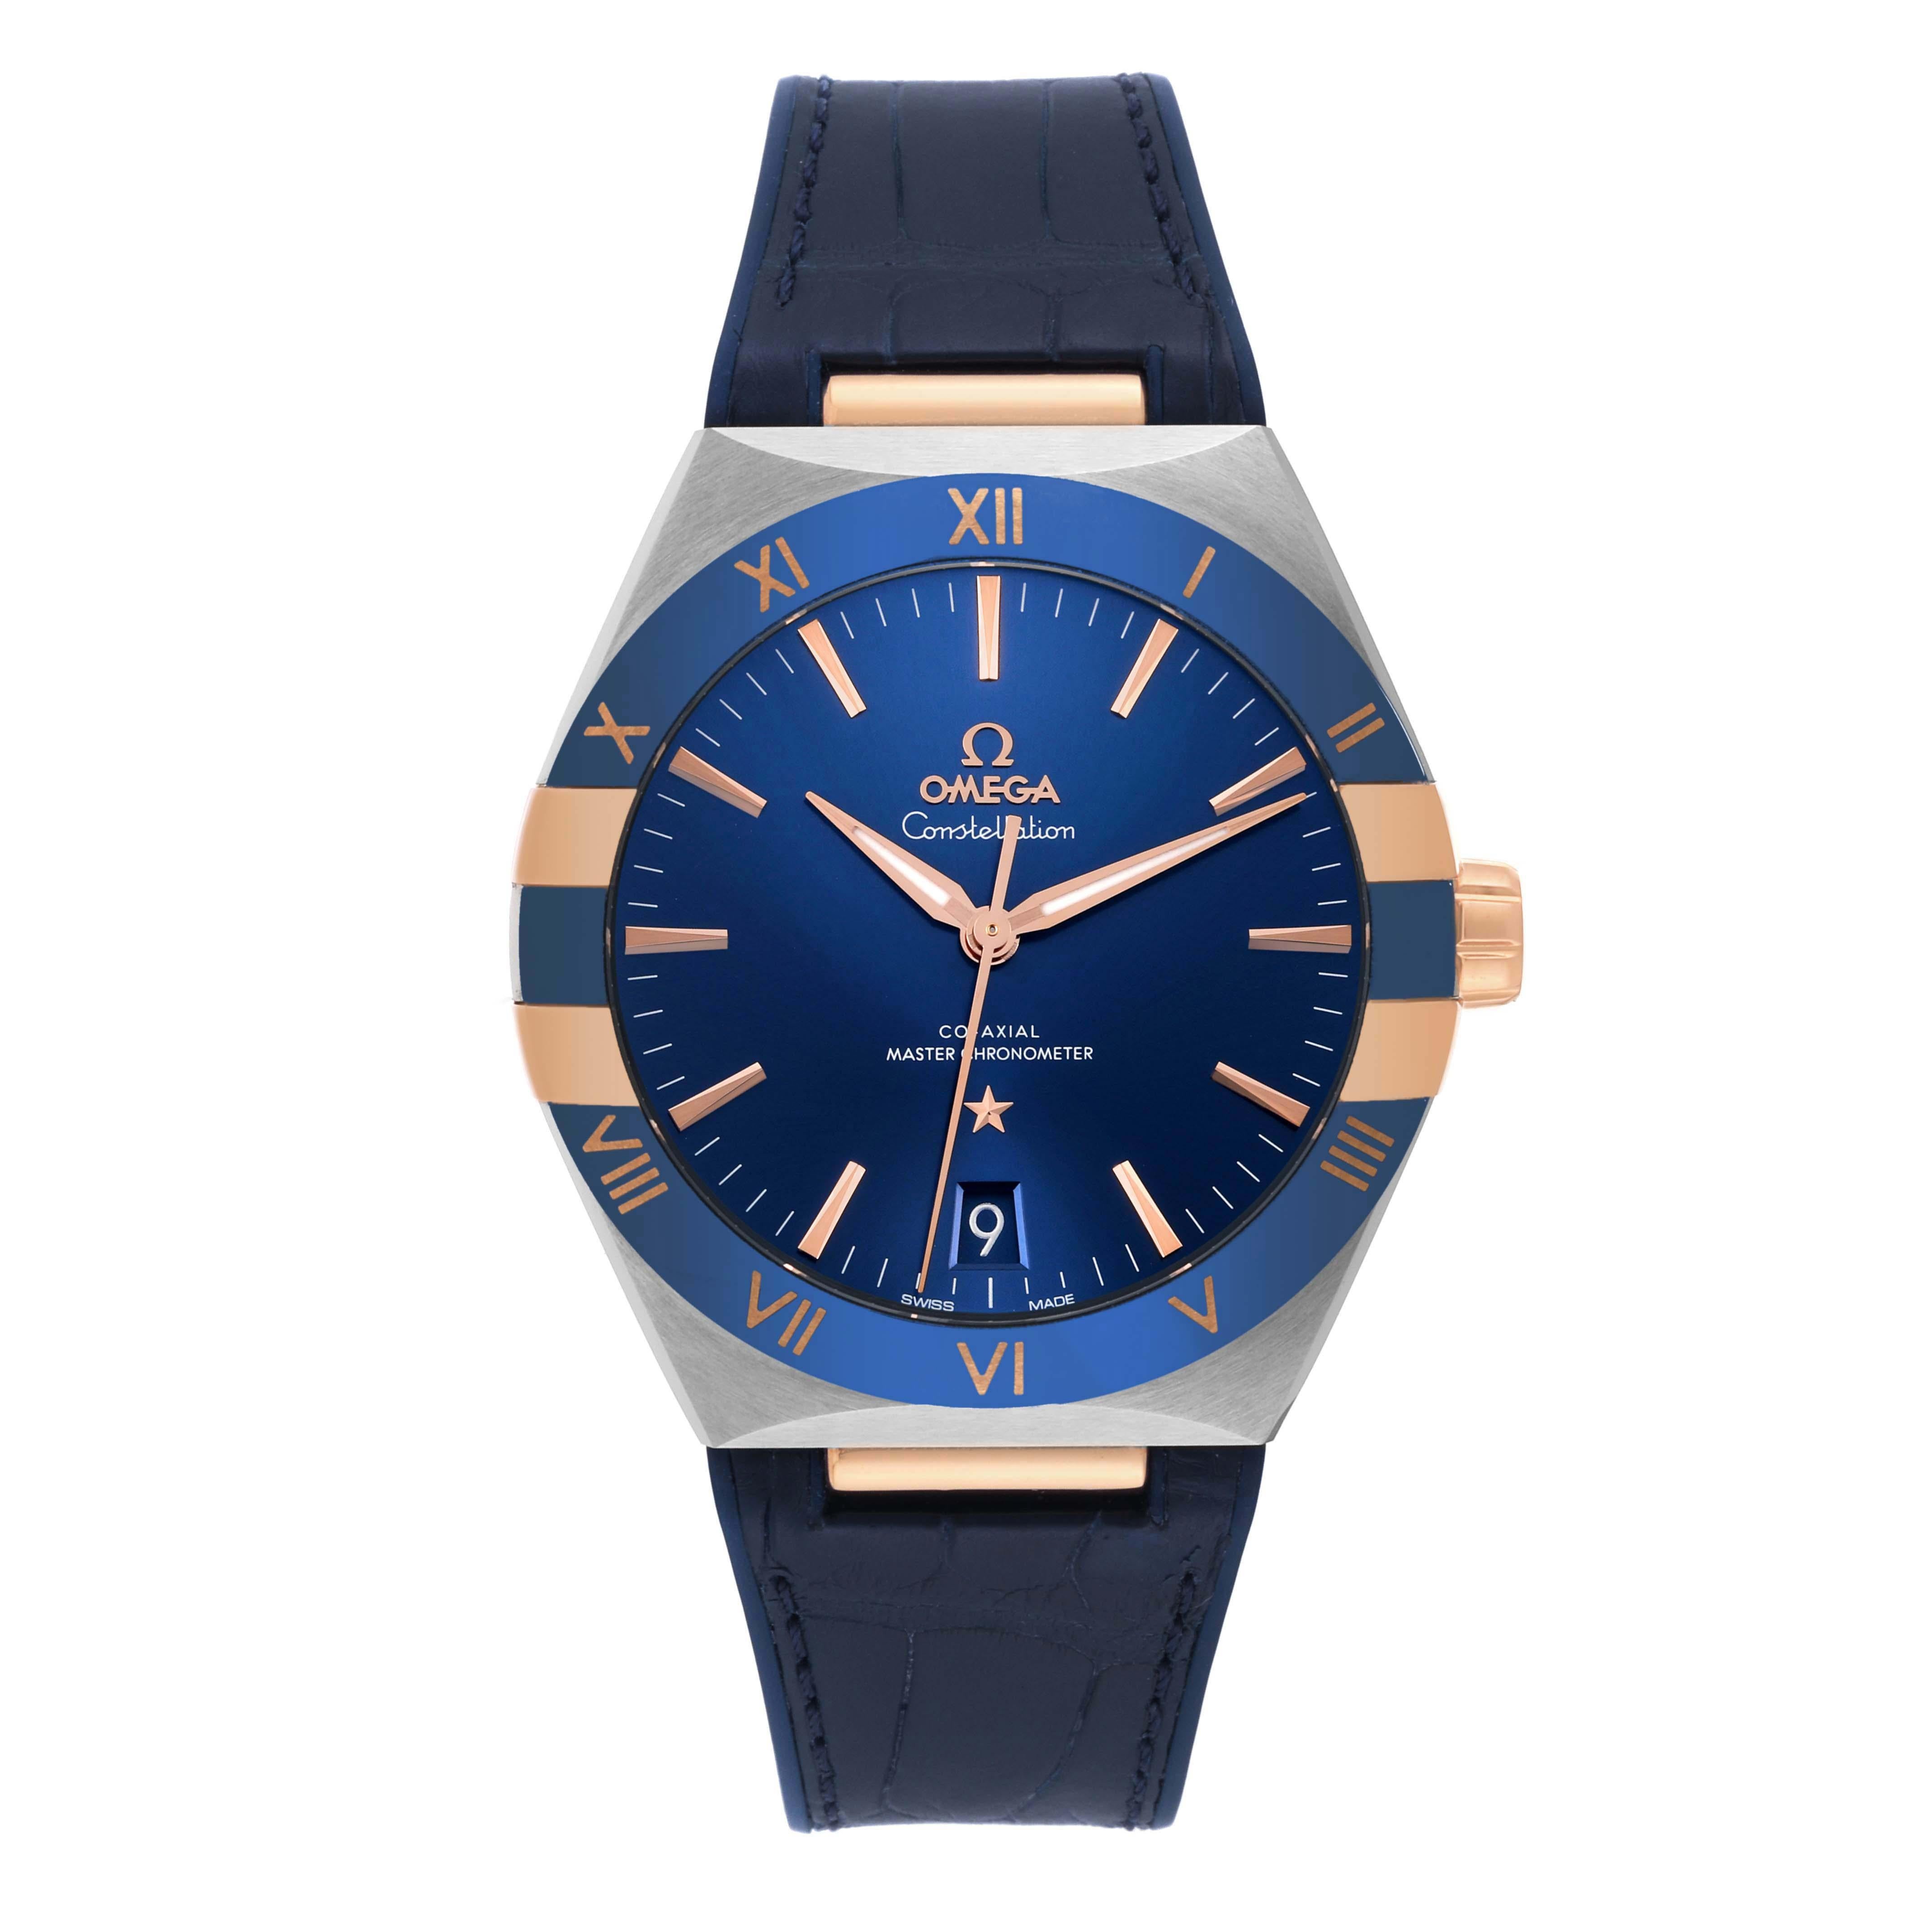 Omega Constellation 41mm Steel Rose Gold Mens Watch 131.23.41.21.03.001 Box Card. Automatic self-winding Co-Axial escapement movement. Stainless steel case 41.0 mm in diameter. Omega logo on an 18k rose gold crown. Blue ceramic bezel with rose gold